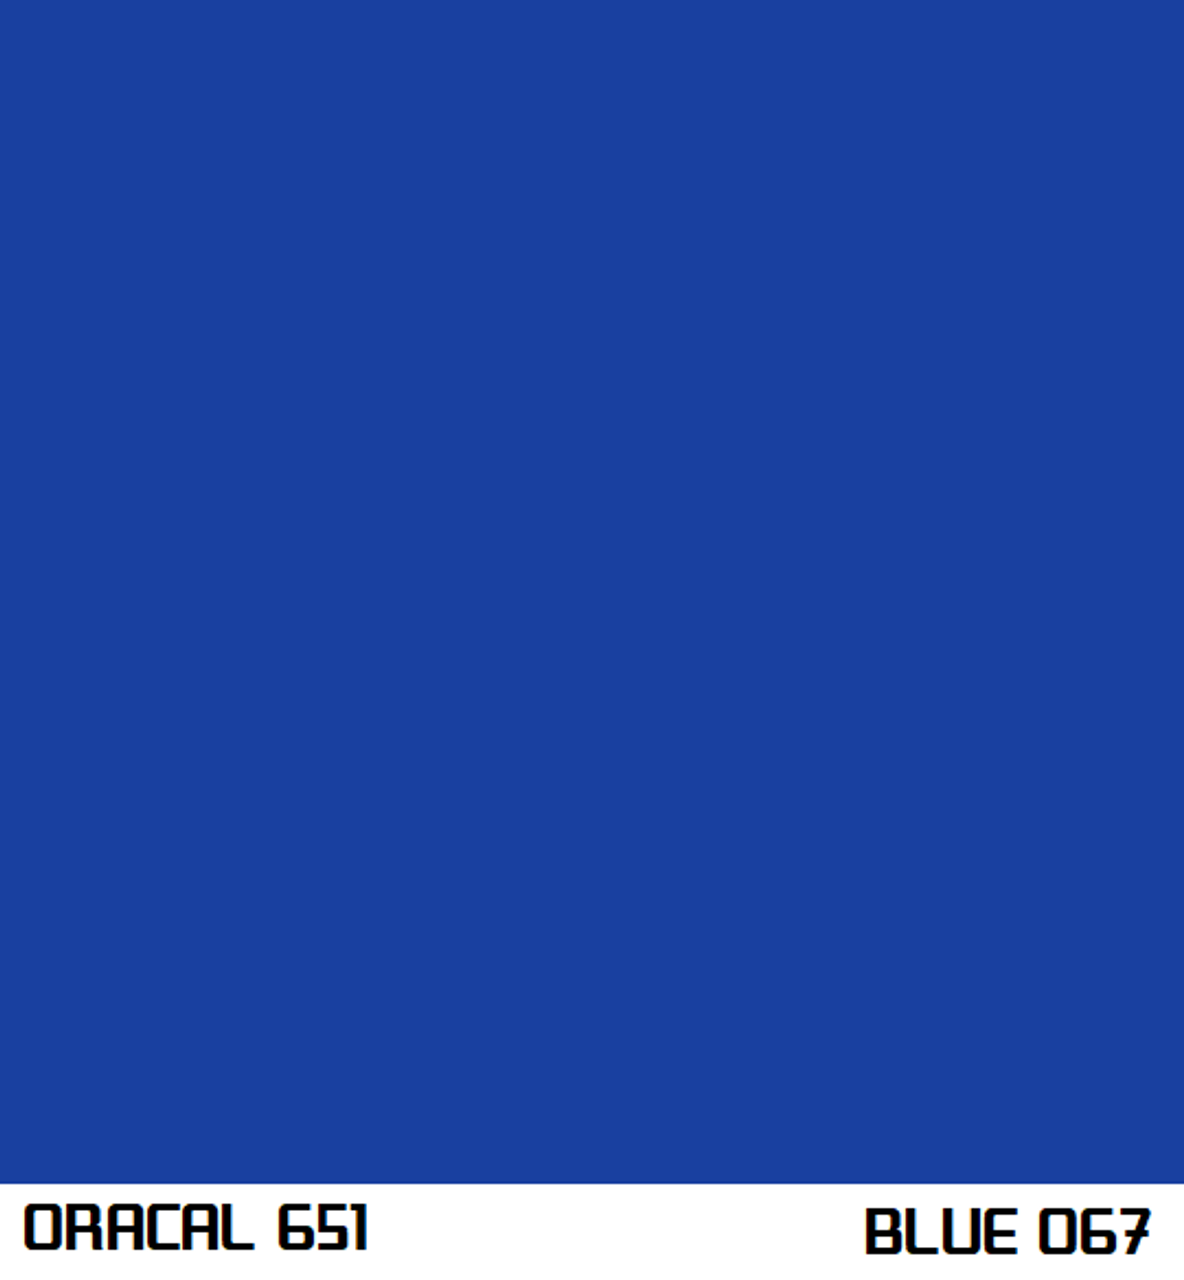 Oracal 651 Permanent Adhesive Vinyl Gloss - Color: Blue 067